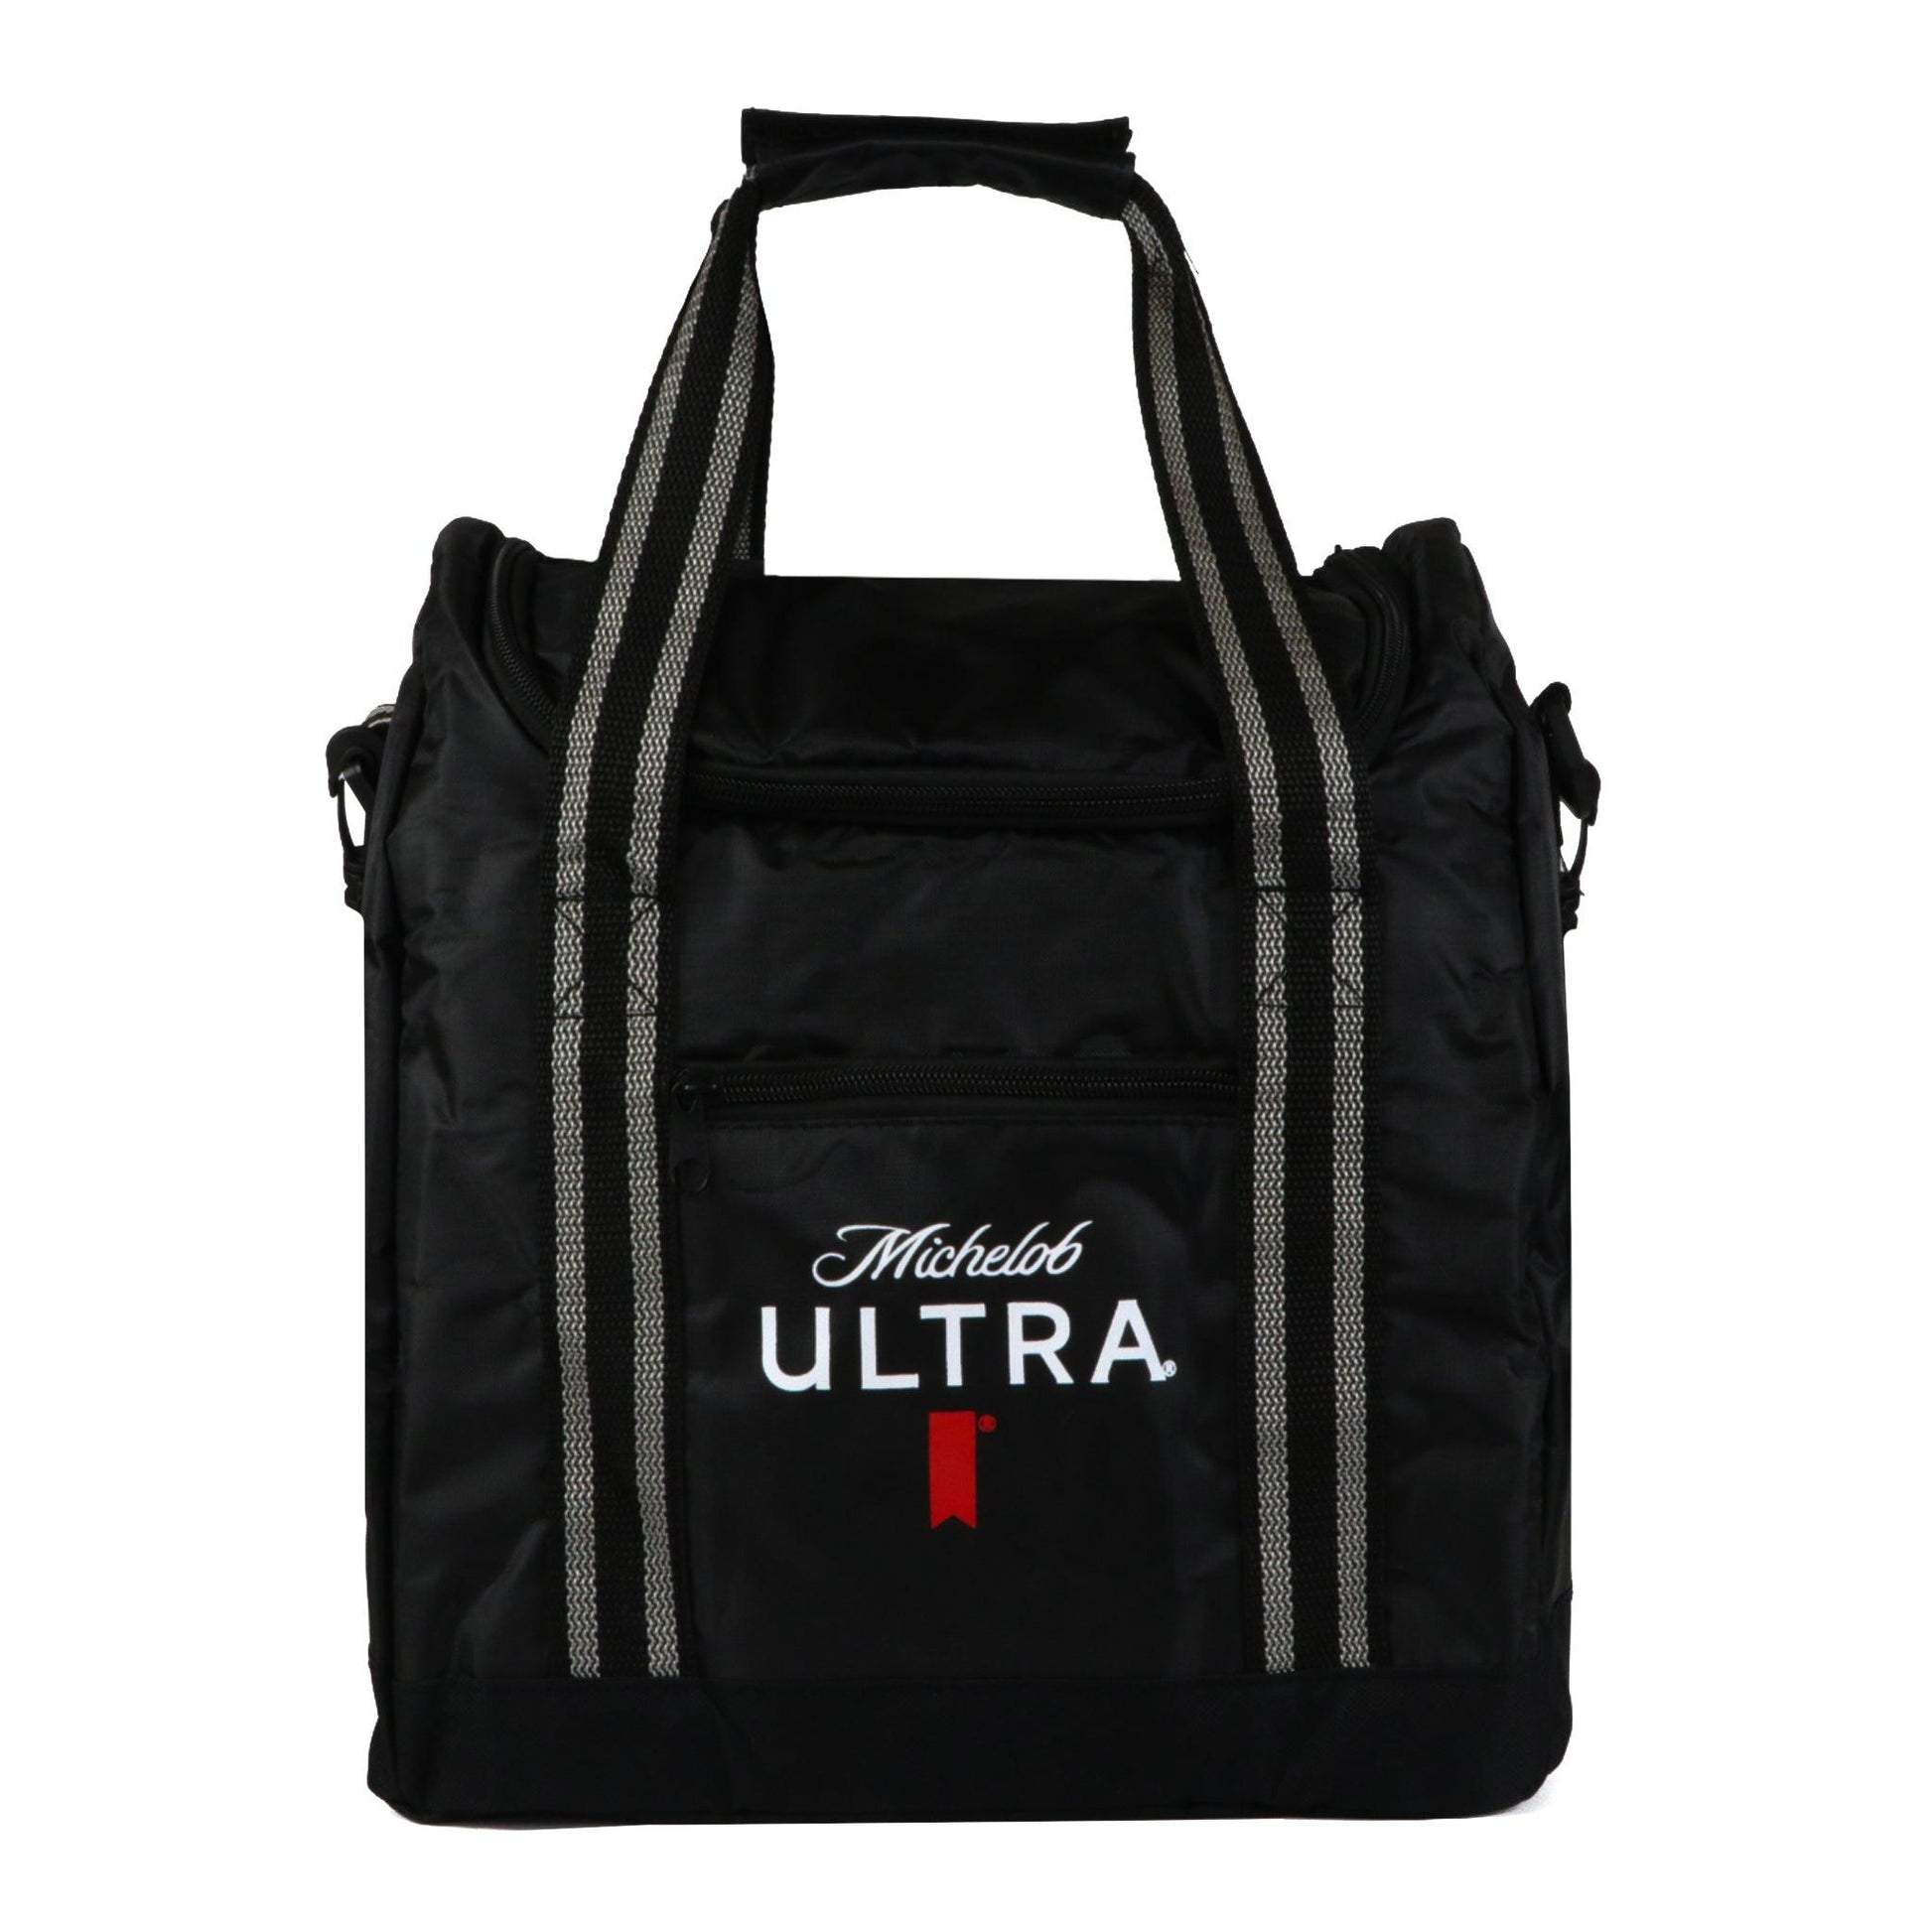 Black soft sided cooler with Michelob ULTRA logo with ribbon on front zipper pocket of bag. Features carry handle and top zipper enclosure